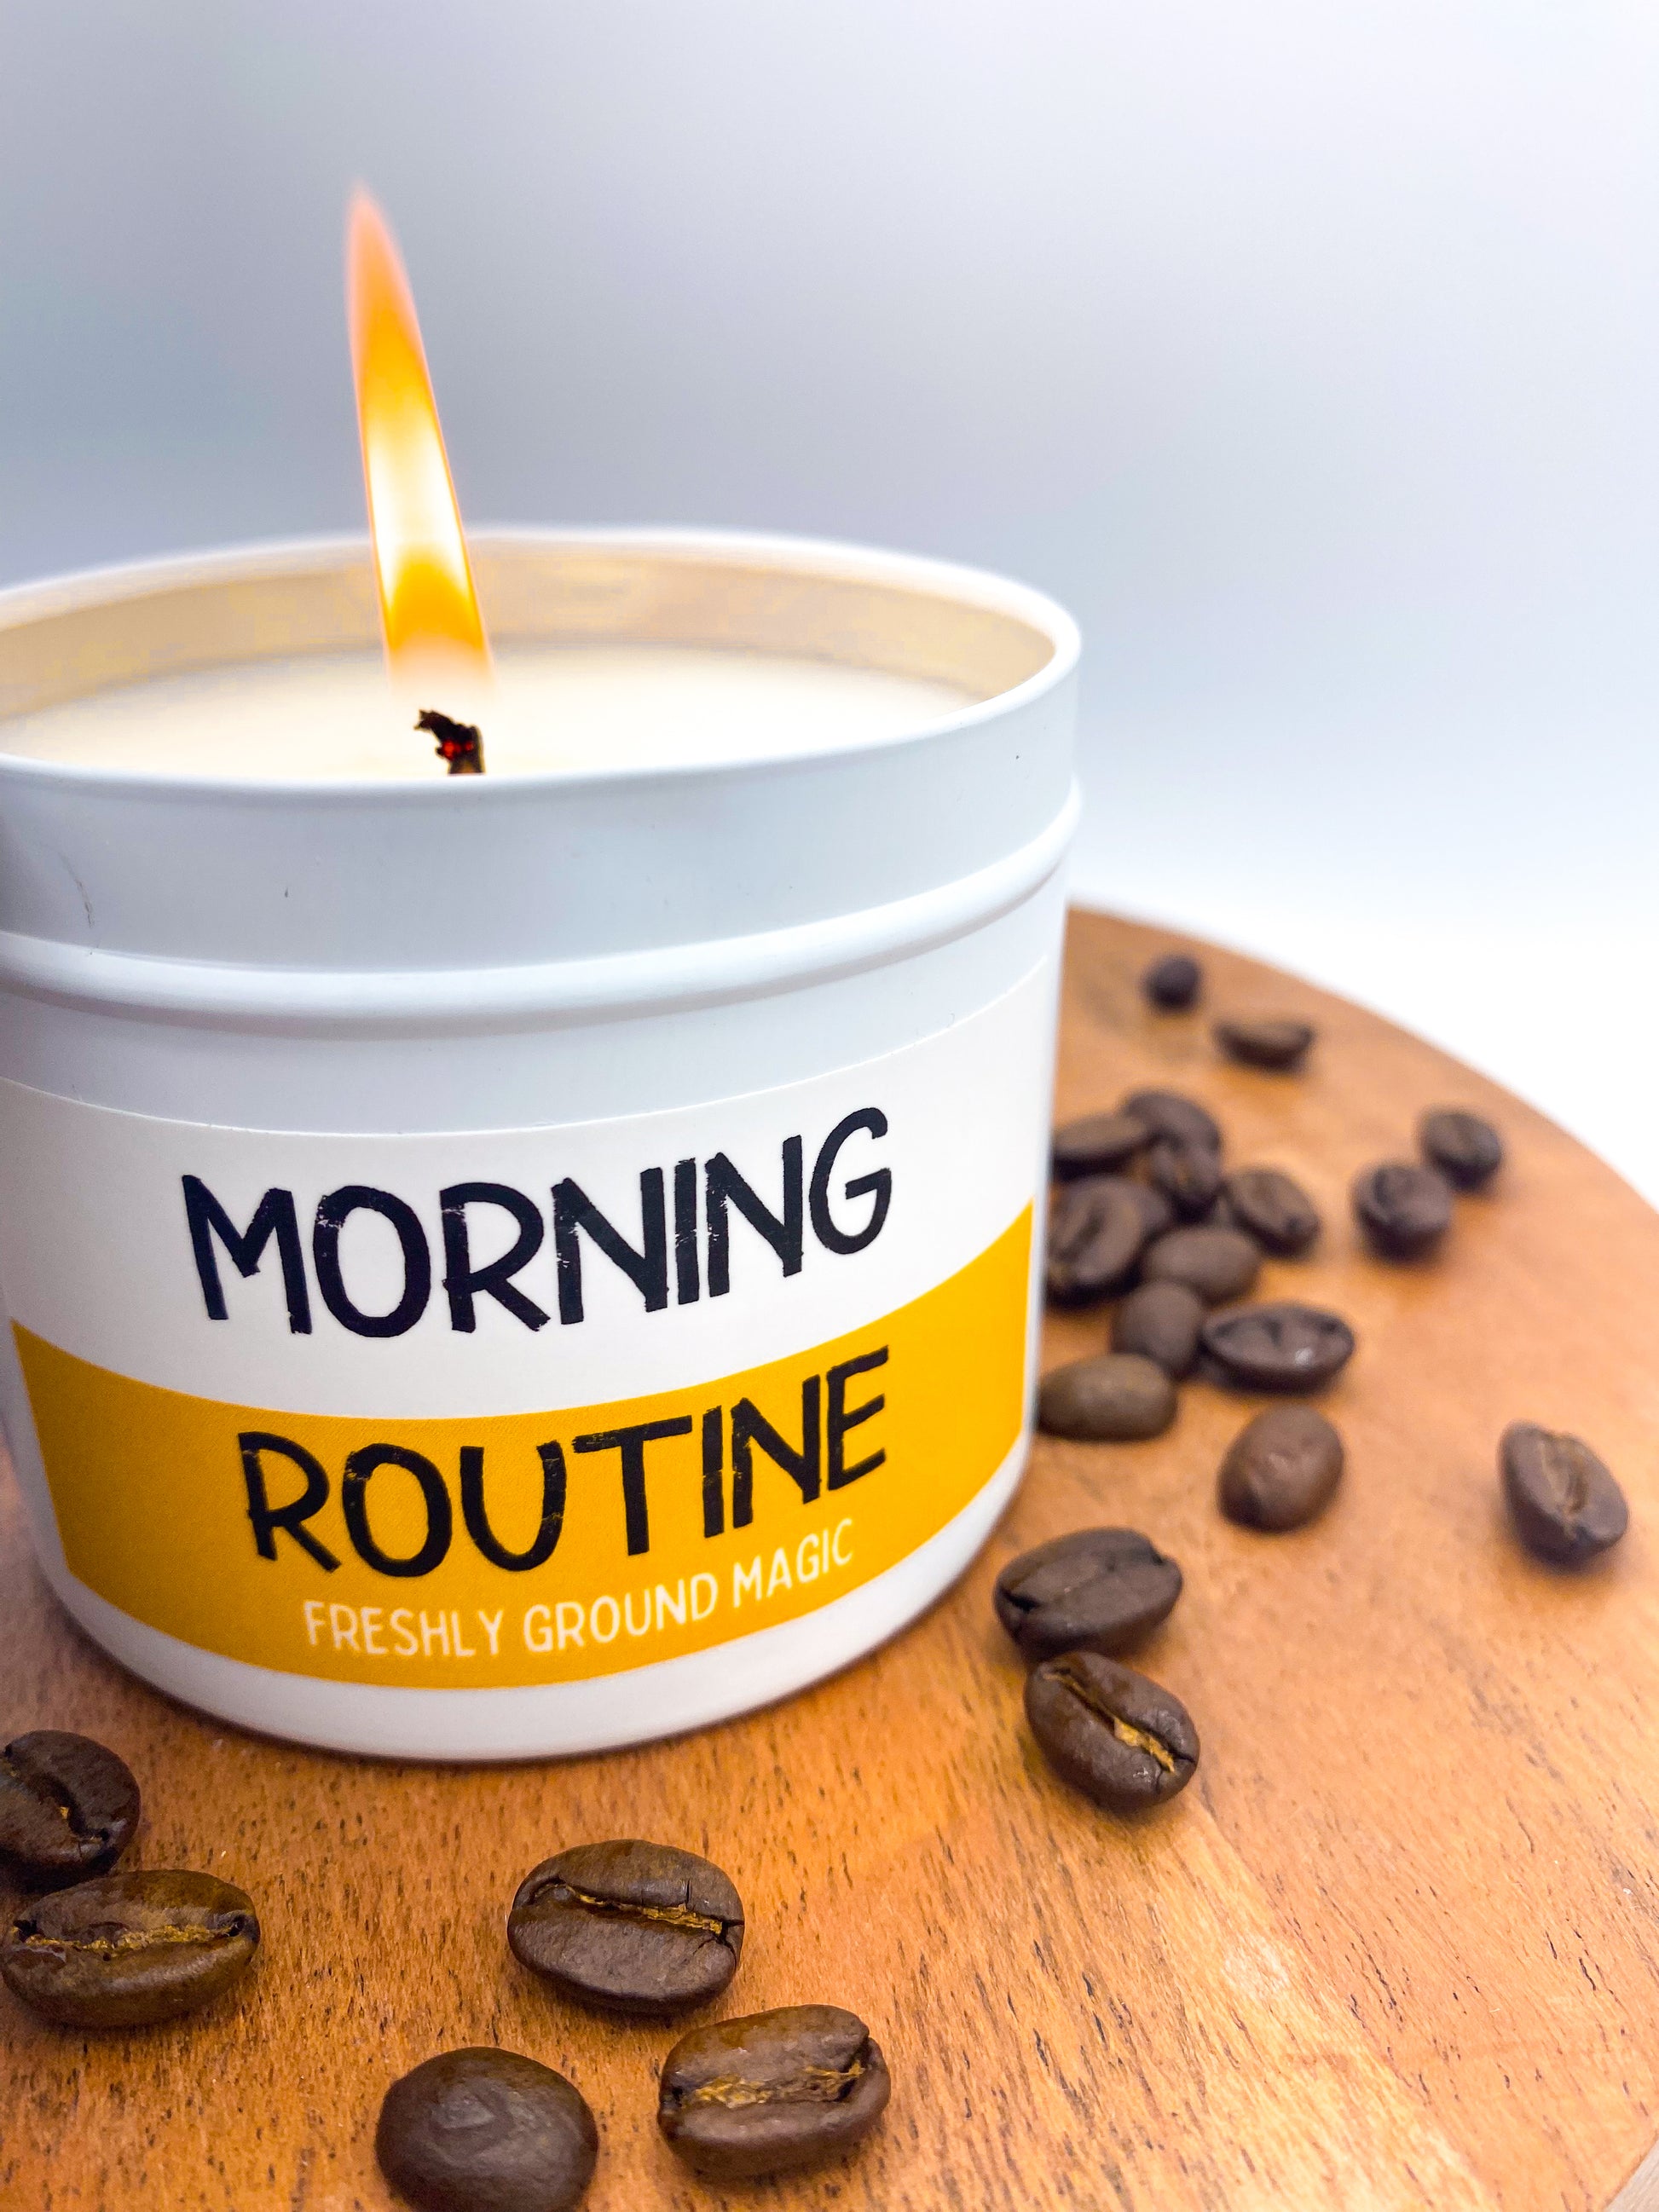 Lit "Morning Routine" candle in white tin